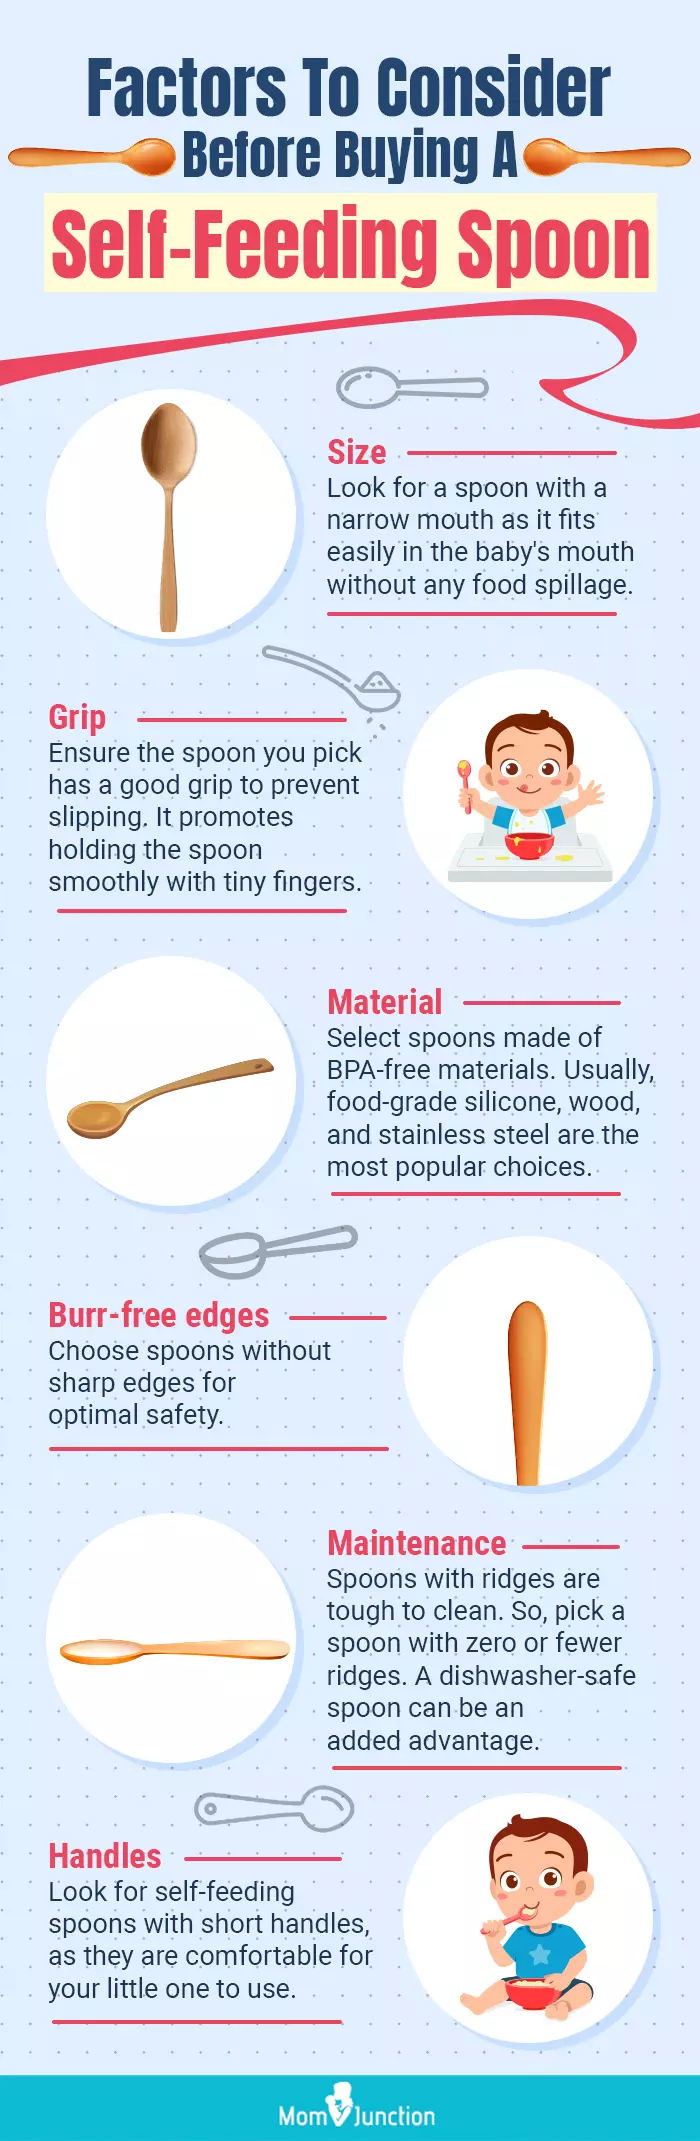 Factors To Consider Before Buying A Self-Feeding Spoon